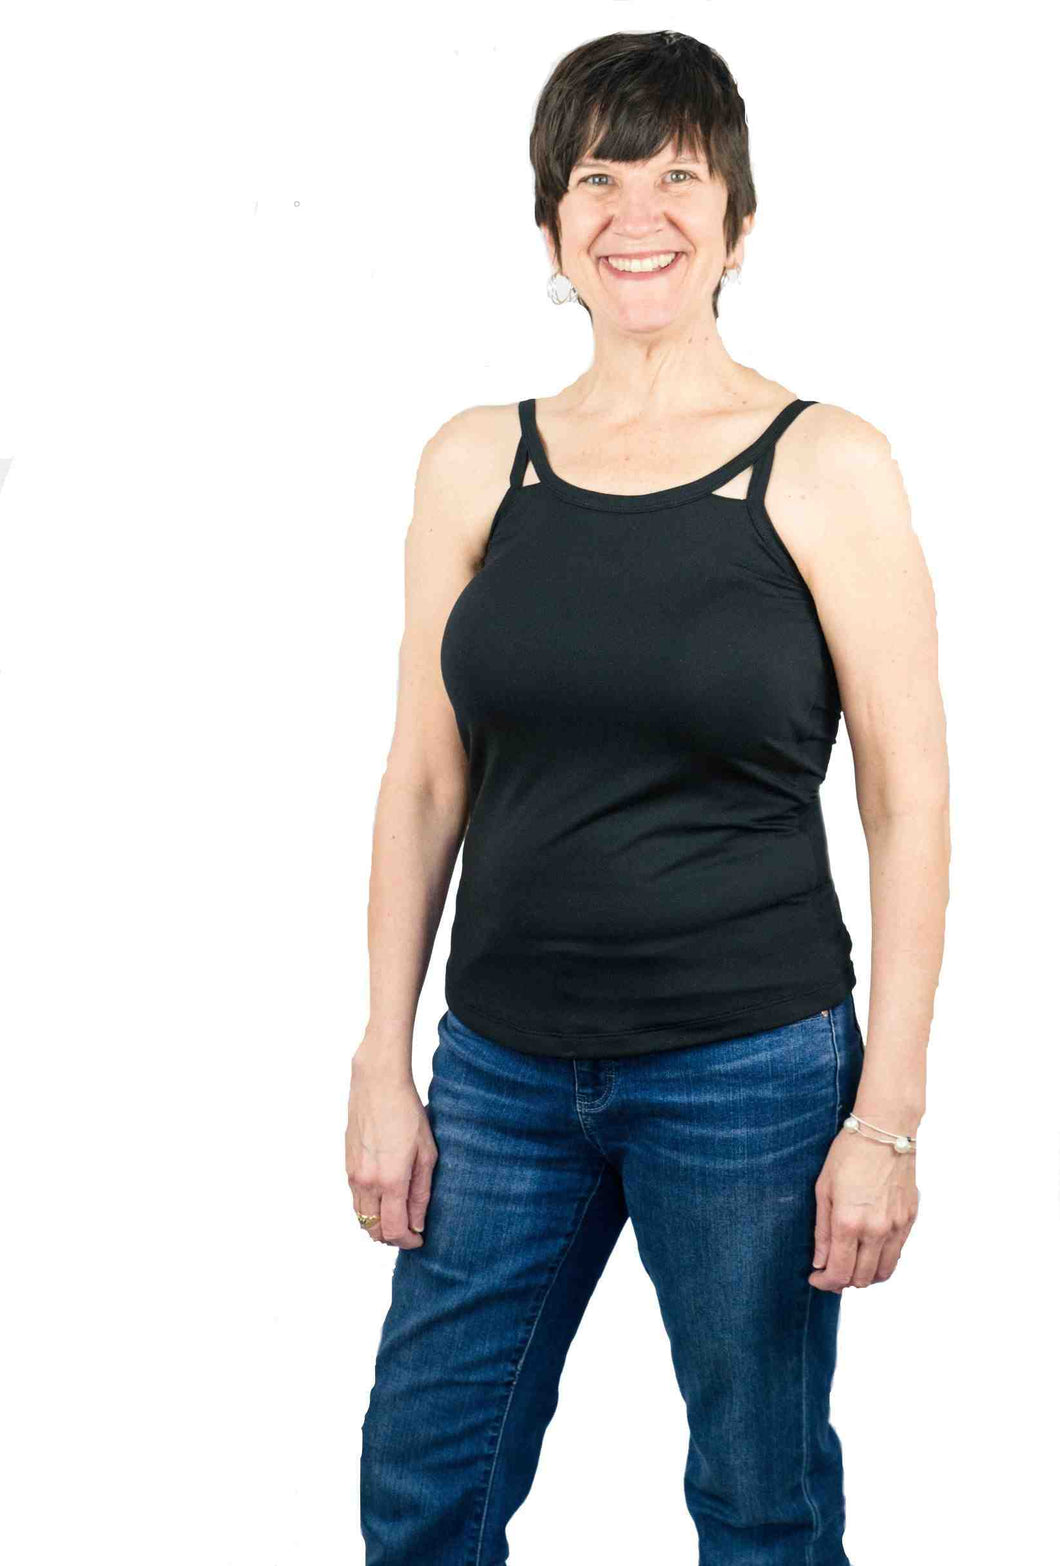 Mastectomy bra camisole with integrated breast forms in cut out tank top and no bra band on sensitive skin or mastectomy scars